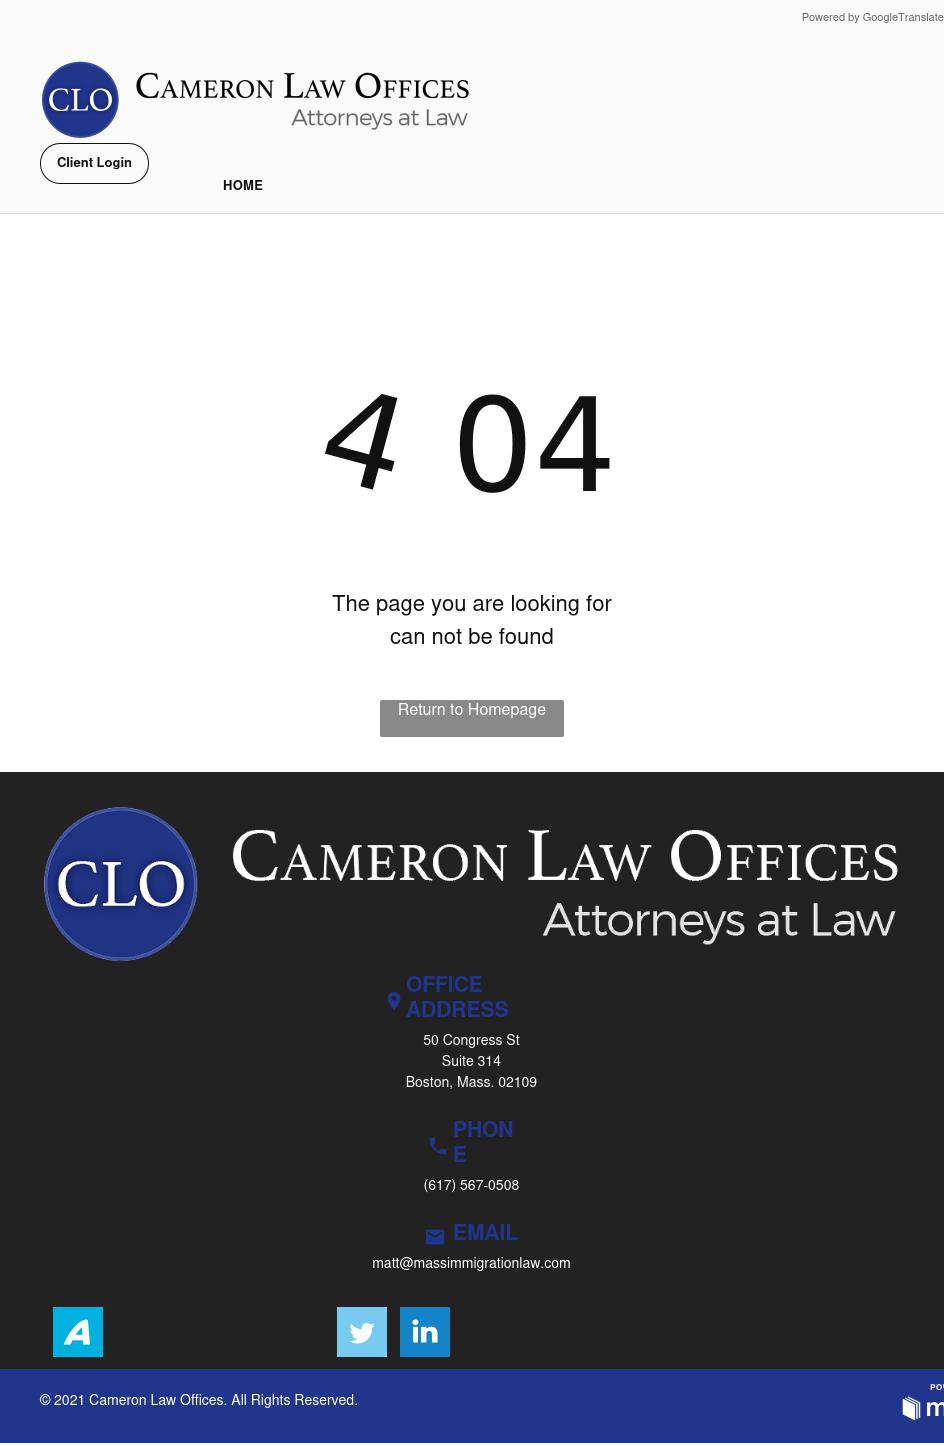 Cameron Law Offices - East Boston MA Lawyers